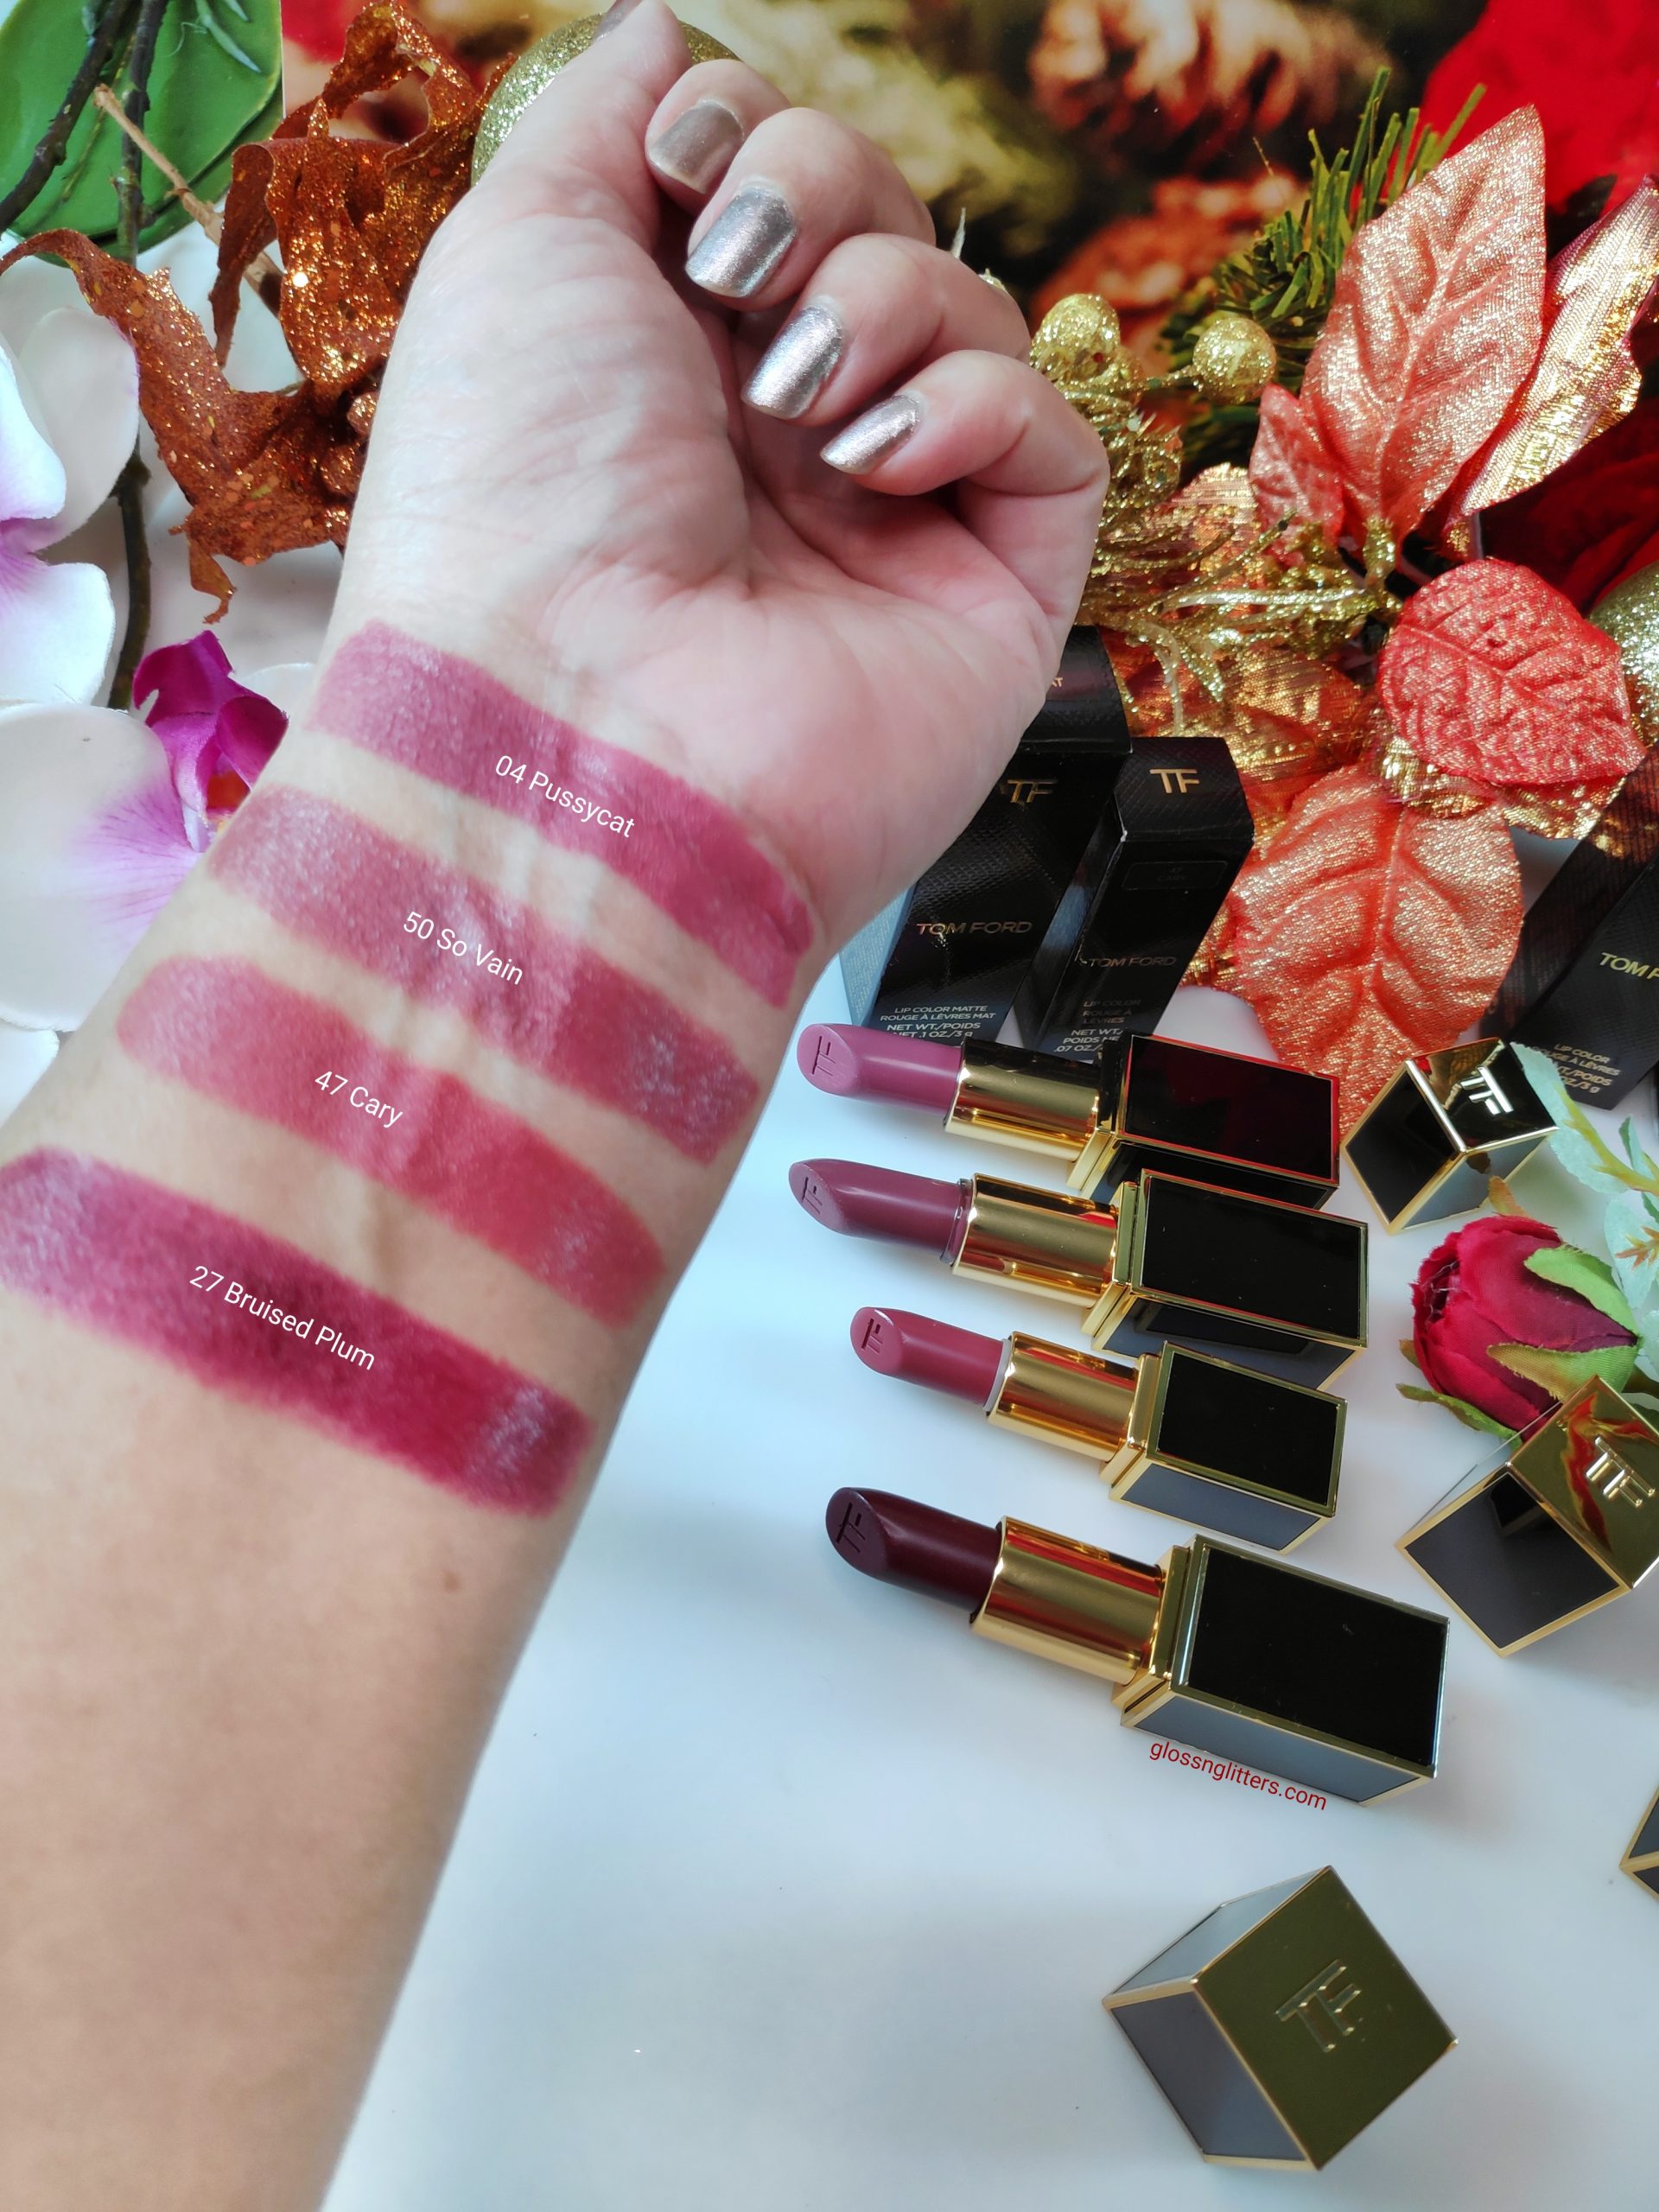 Tom Ford beauty lip color review and swatches - Glossnglitters